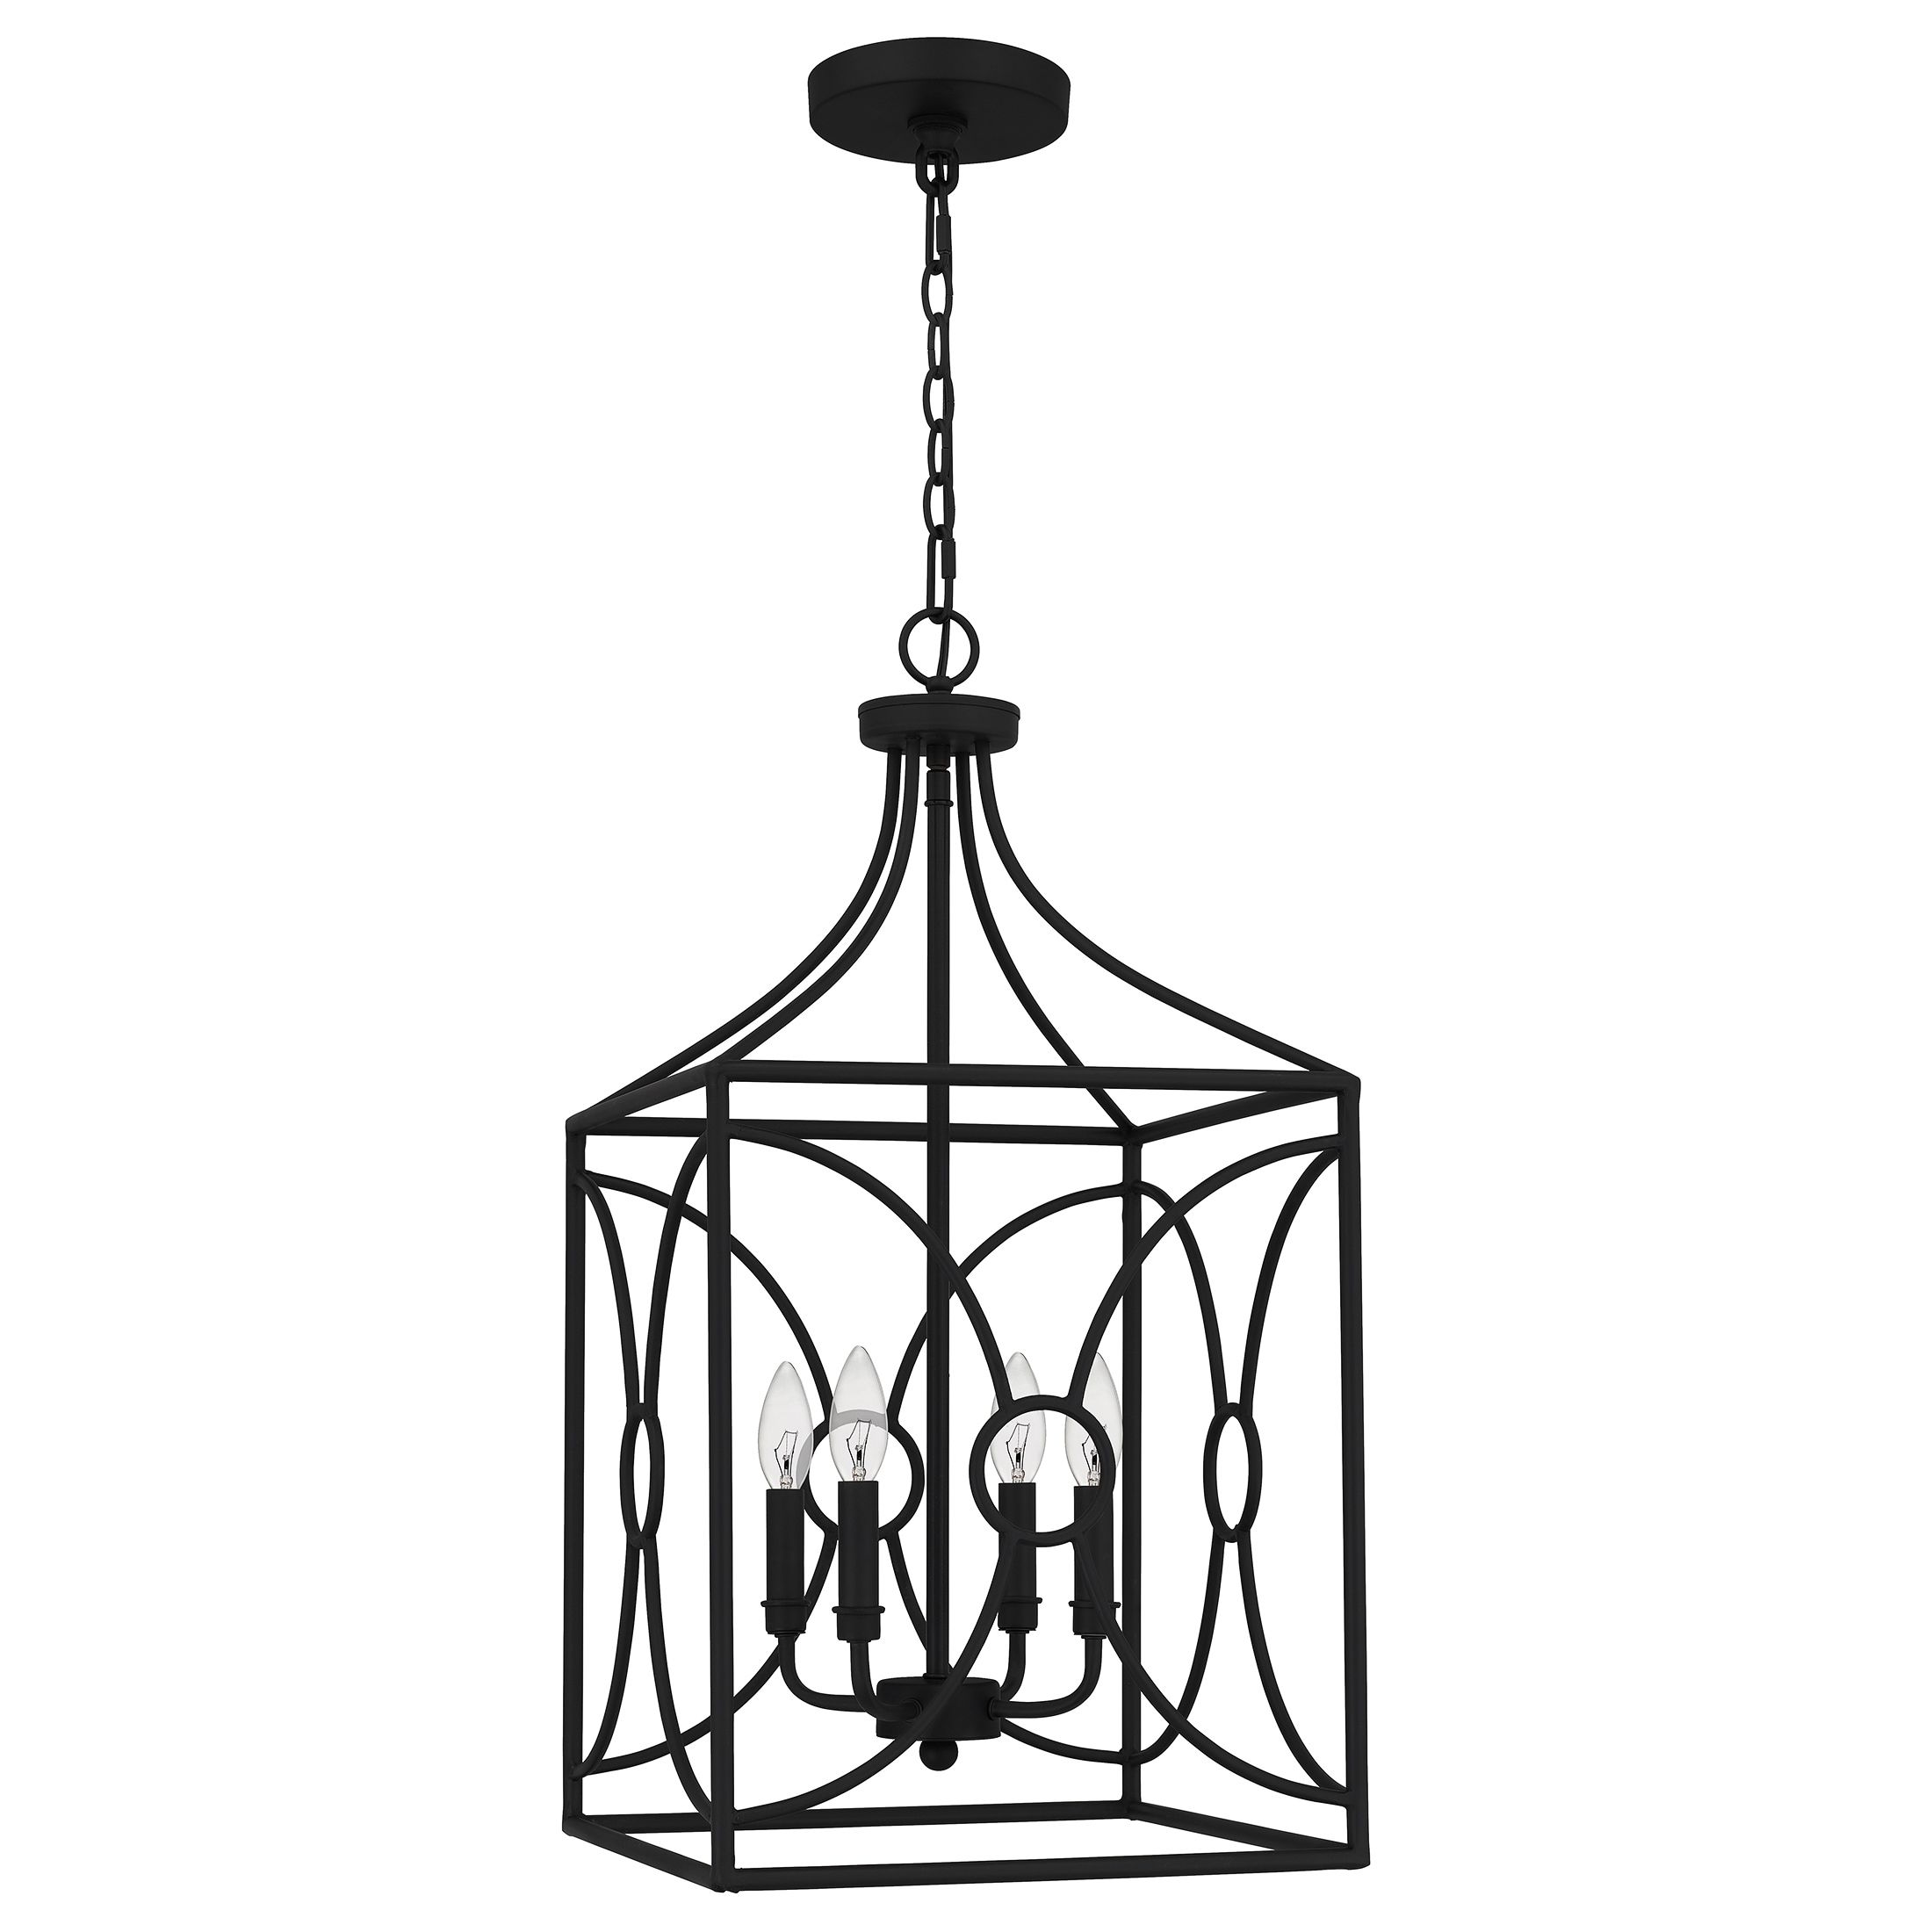 Black With White Lantern Chandeliers Regarding Most Current Quoizel Grenelle 4 Light Matte Black Traditional Lantern Pendant Light In  The Pendant Lighting Department At Lowes (View 14 of 15)